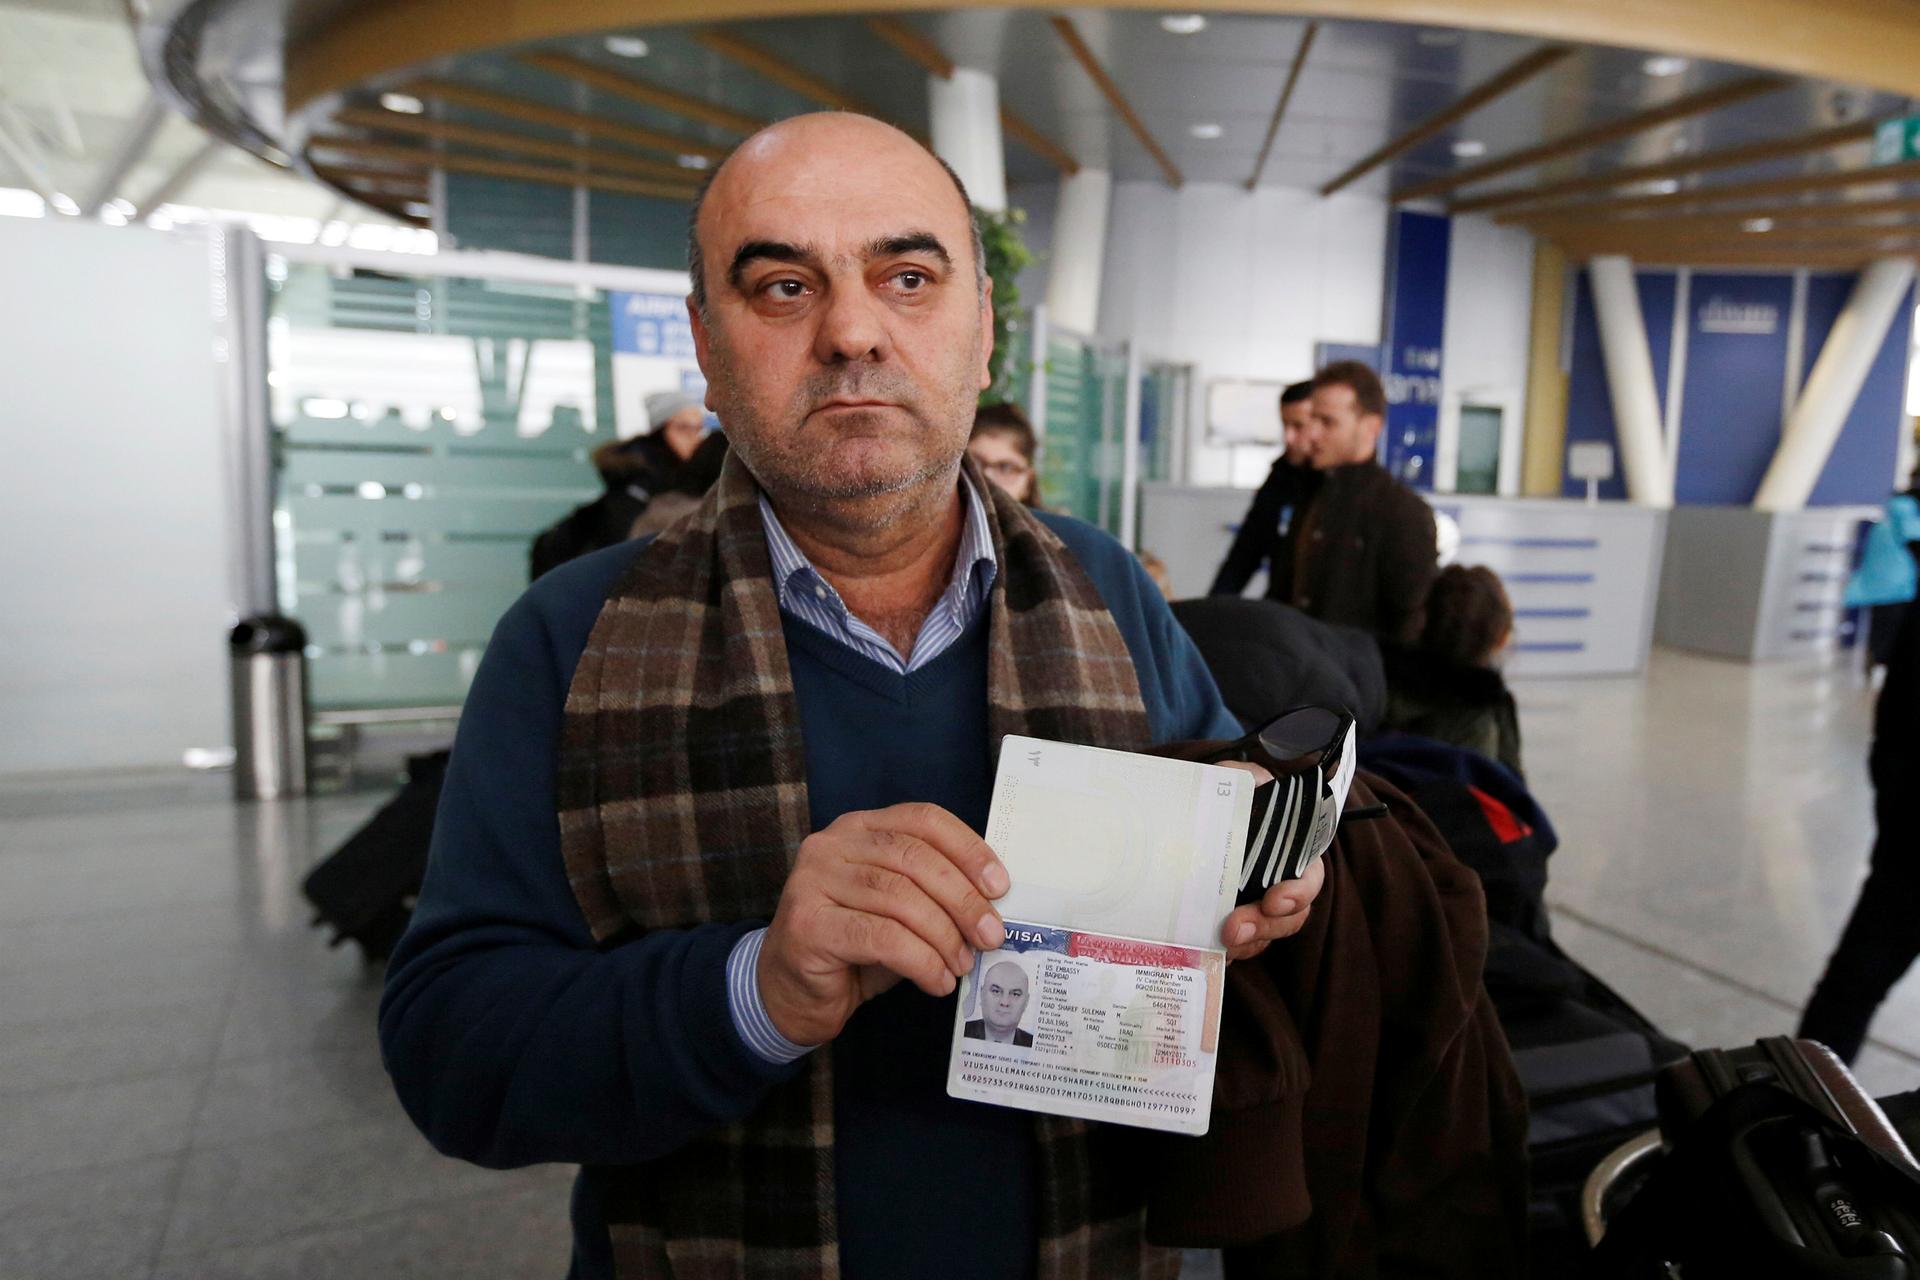 Fuad Sharef shows his US visa to the media at Erbil International Airport, after returning to Iraq from Egypt, Jan. 29, 2017.